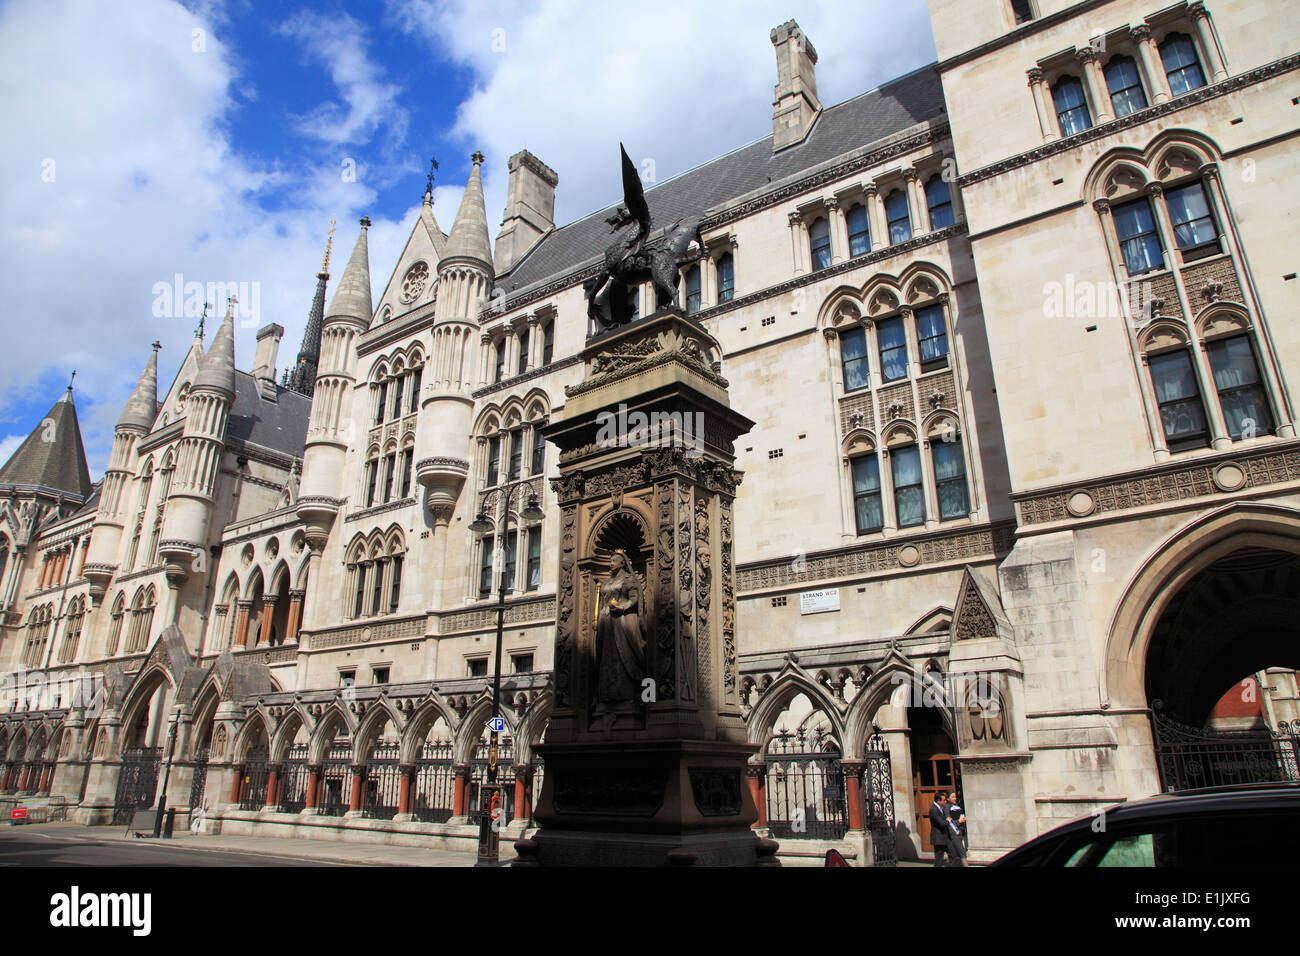 Großbritannien, England, London, Stadt, Temple Bar, Royal Courts of Justice, Stockfoto